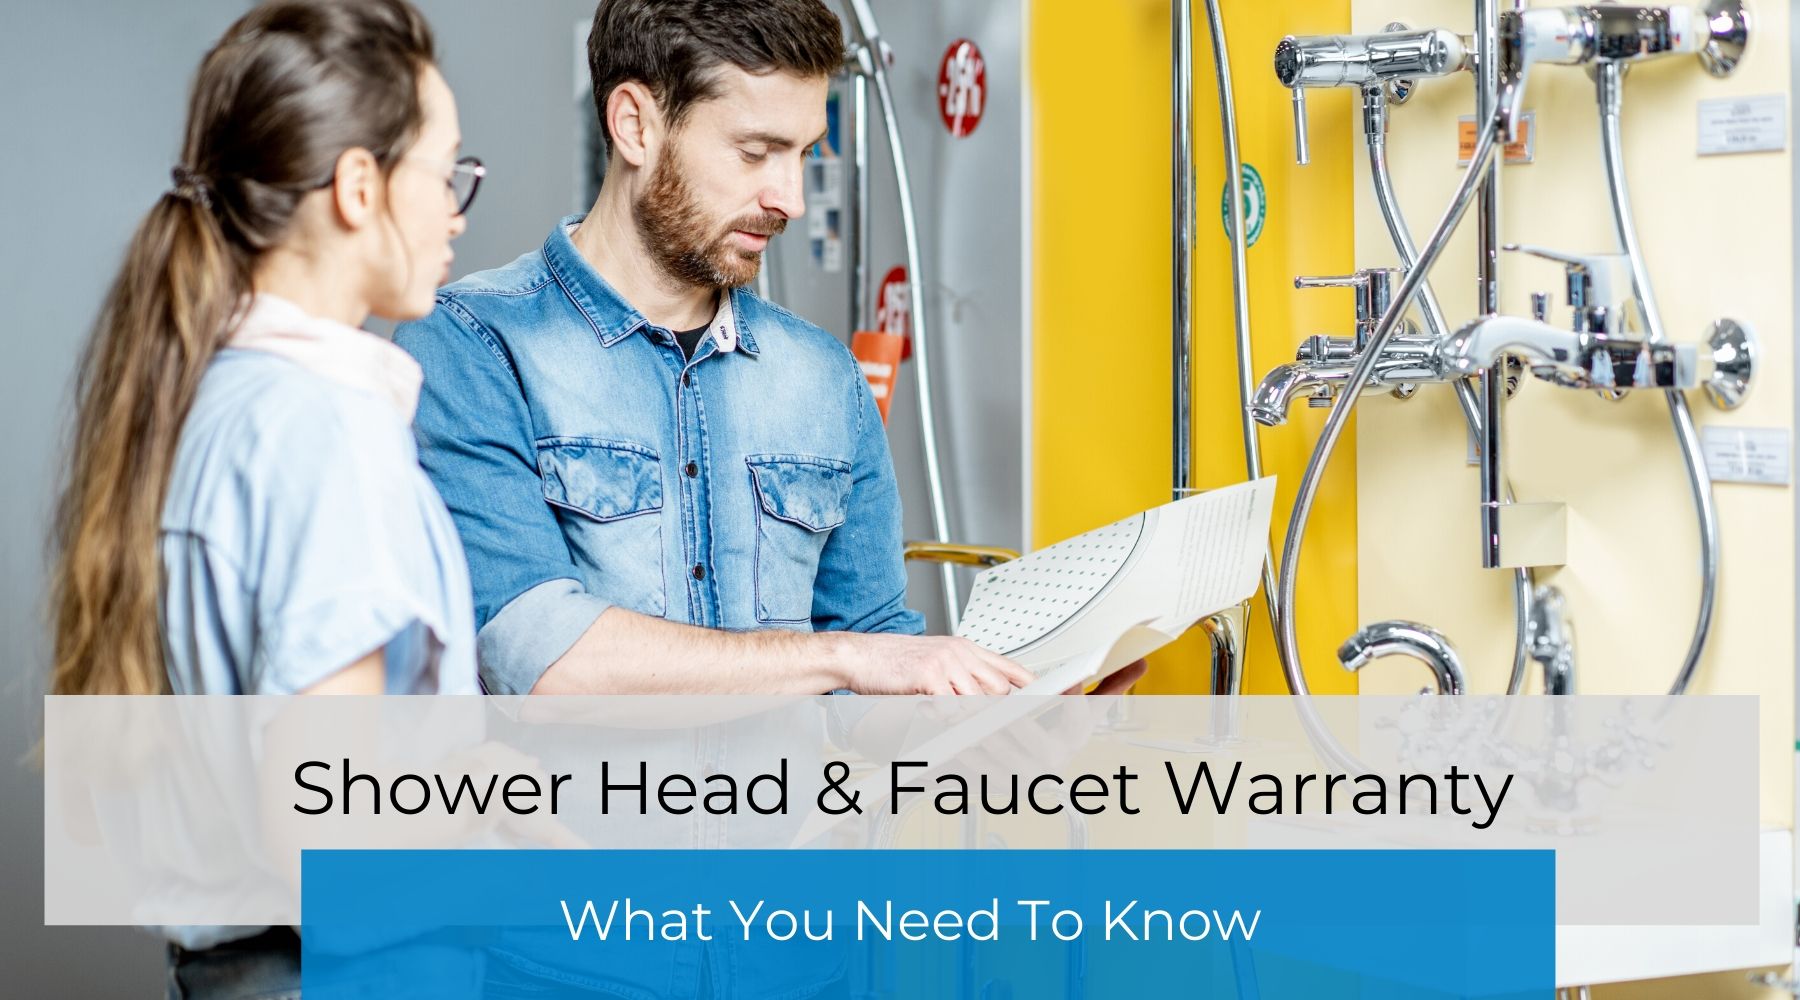 What You Need To Know About Your Shower Head Faucet Warranty